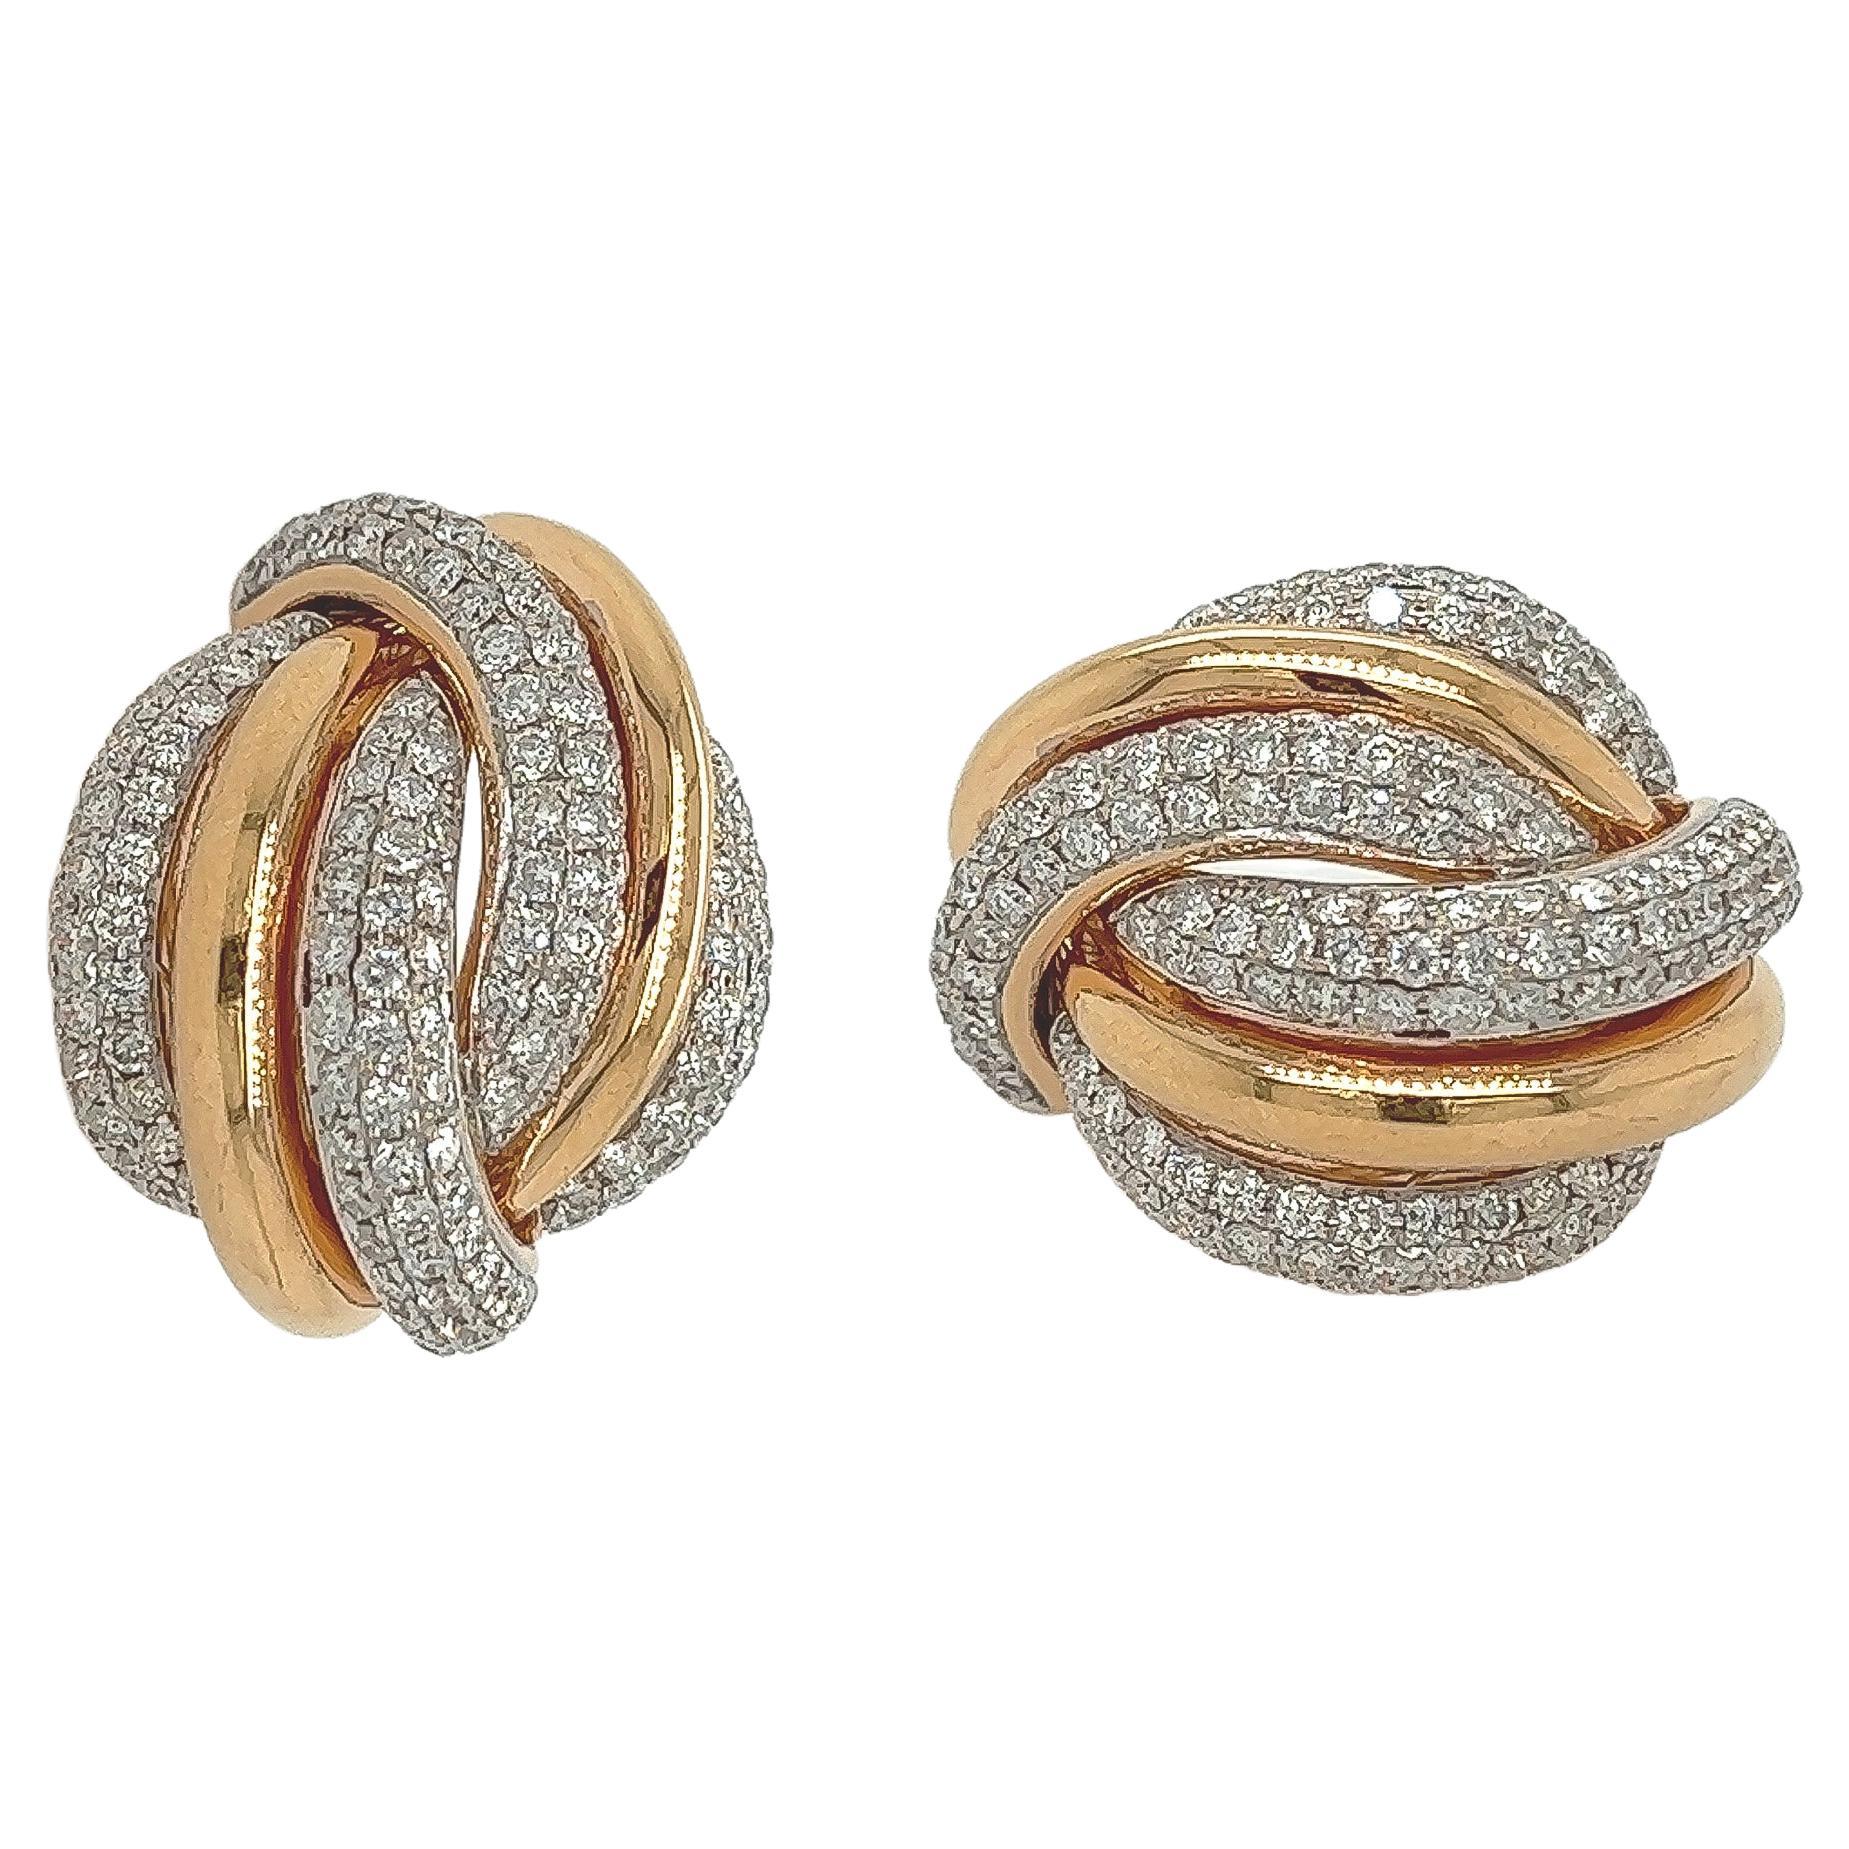 4.25 Carat Diamond and Gold Earrings in 18K Rose Gold For Sale